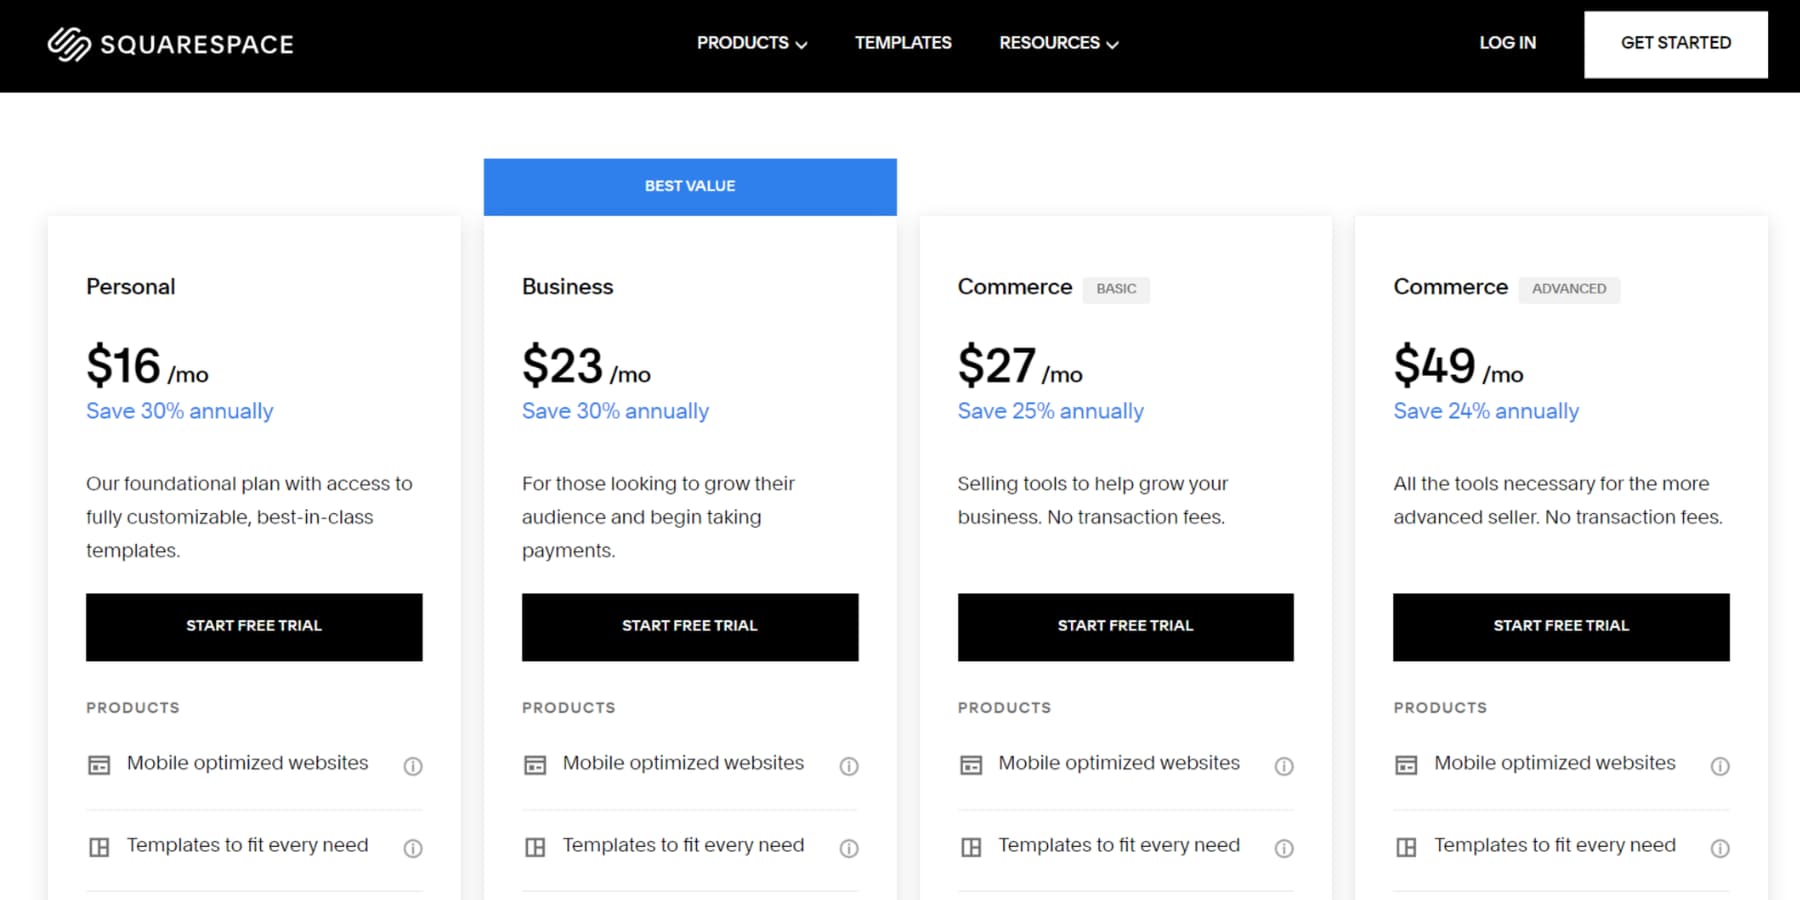 A screenshot of Squarespace's pricing